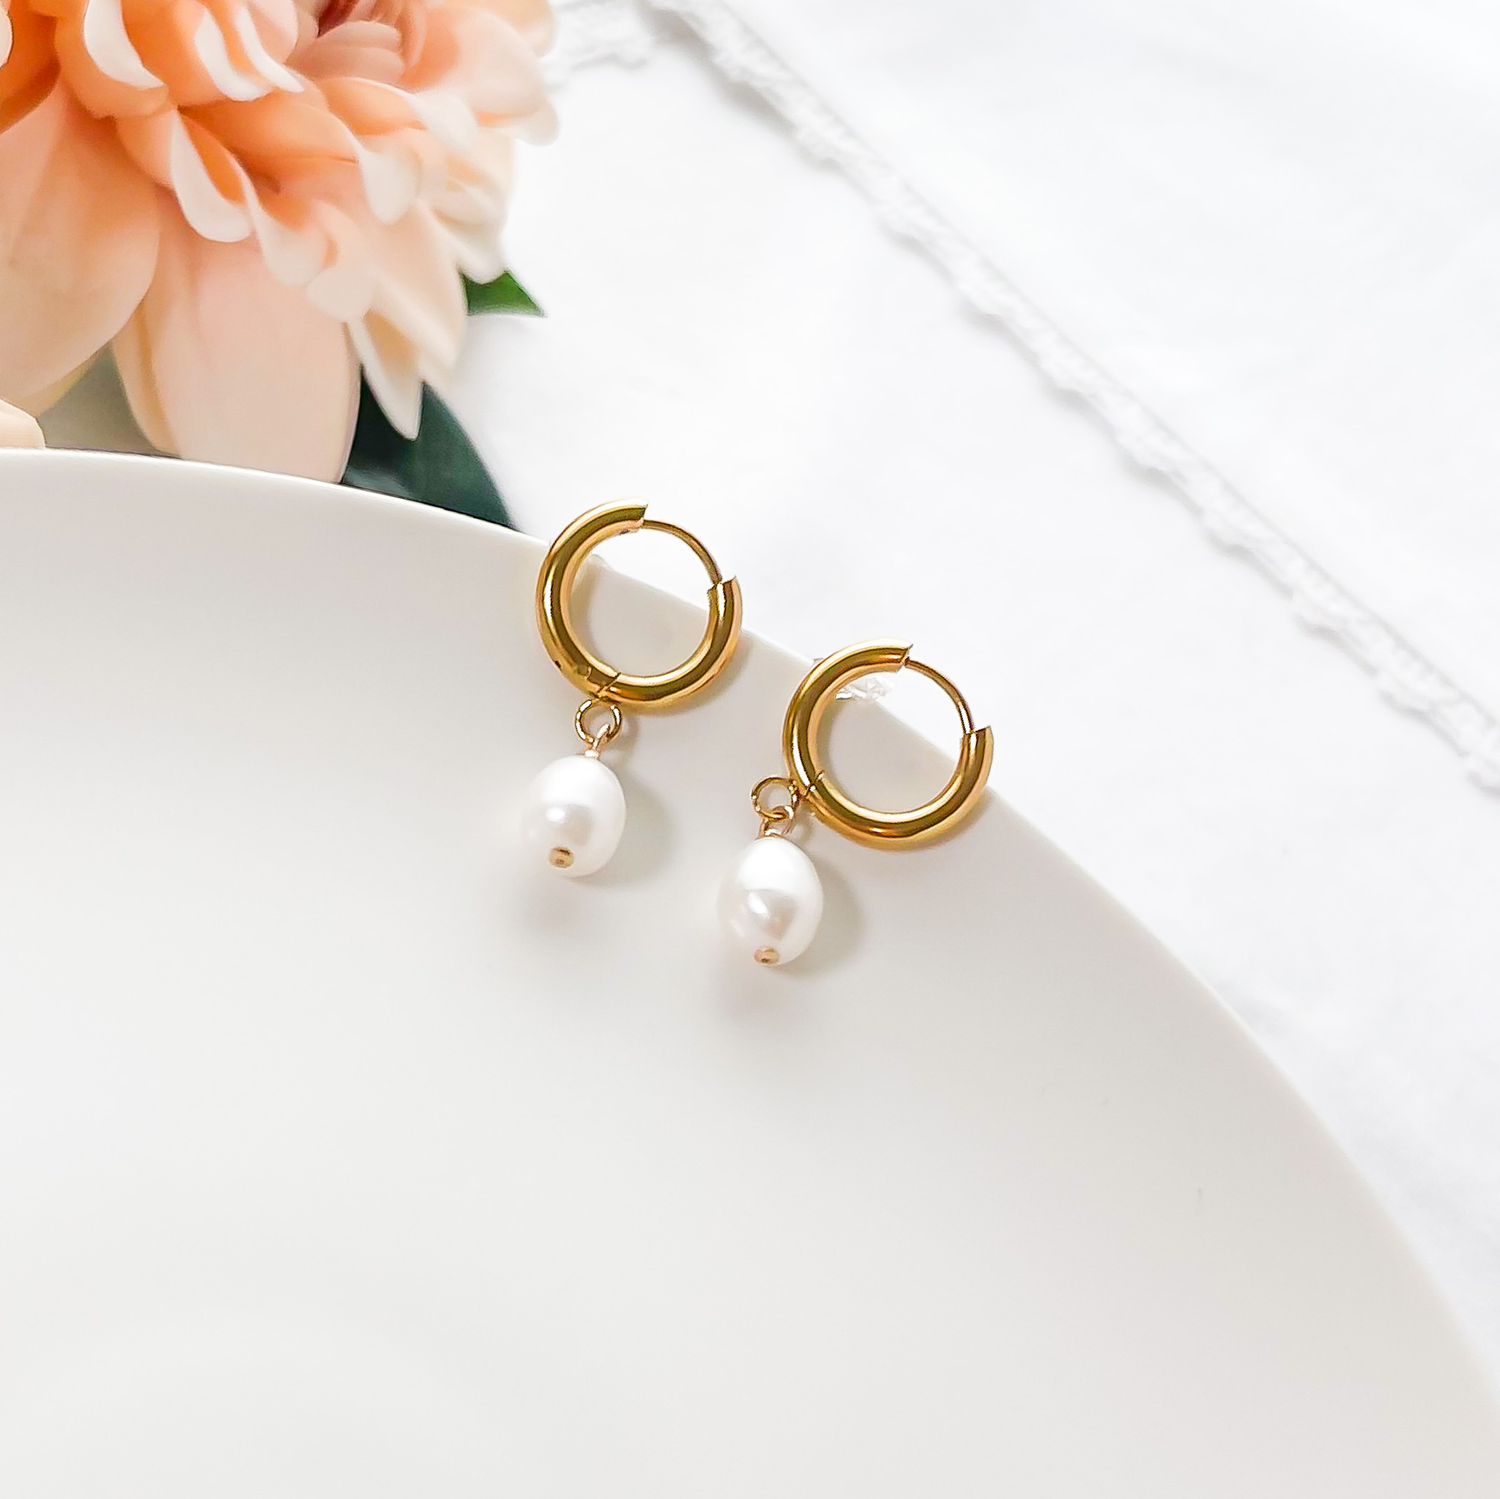 Gold filled wire arch threader earrings with freshwater pearls